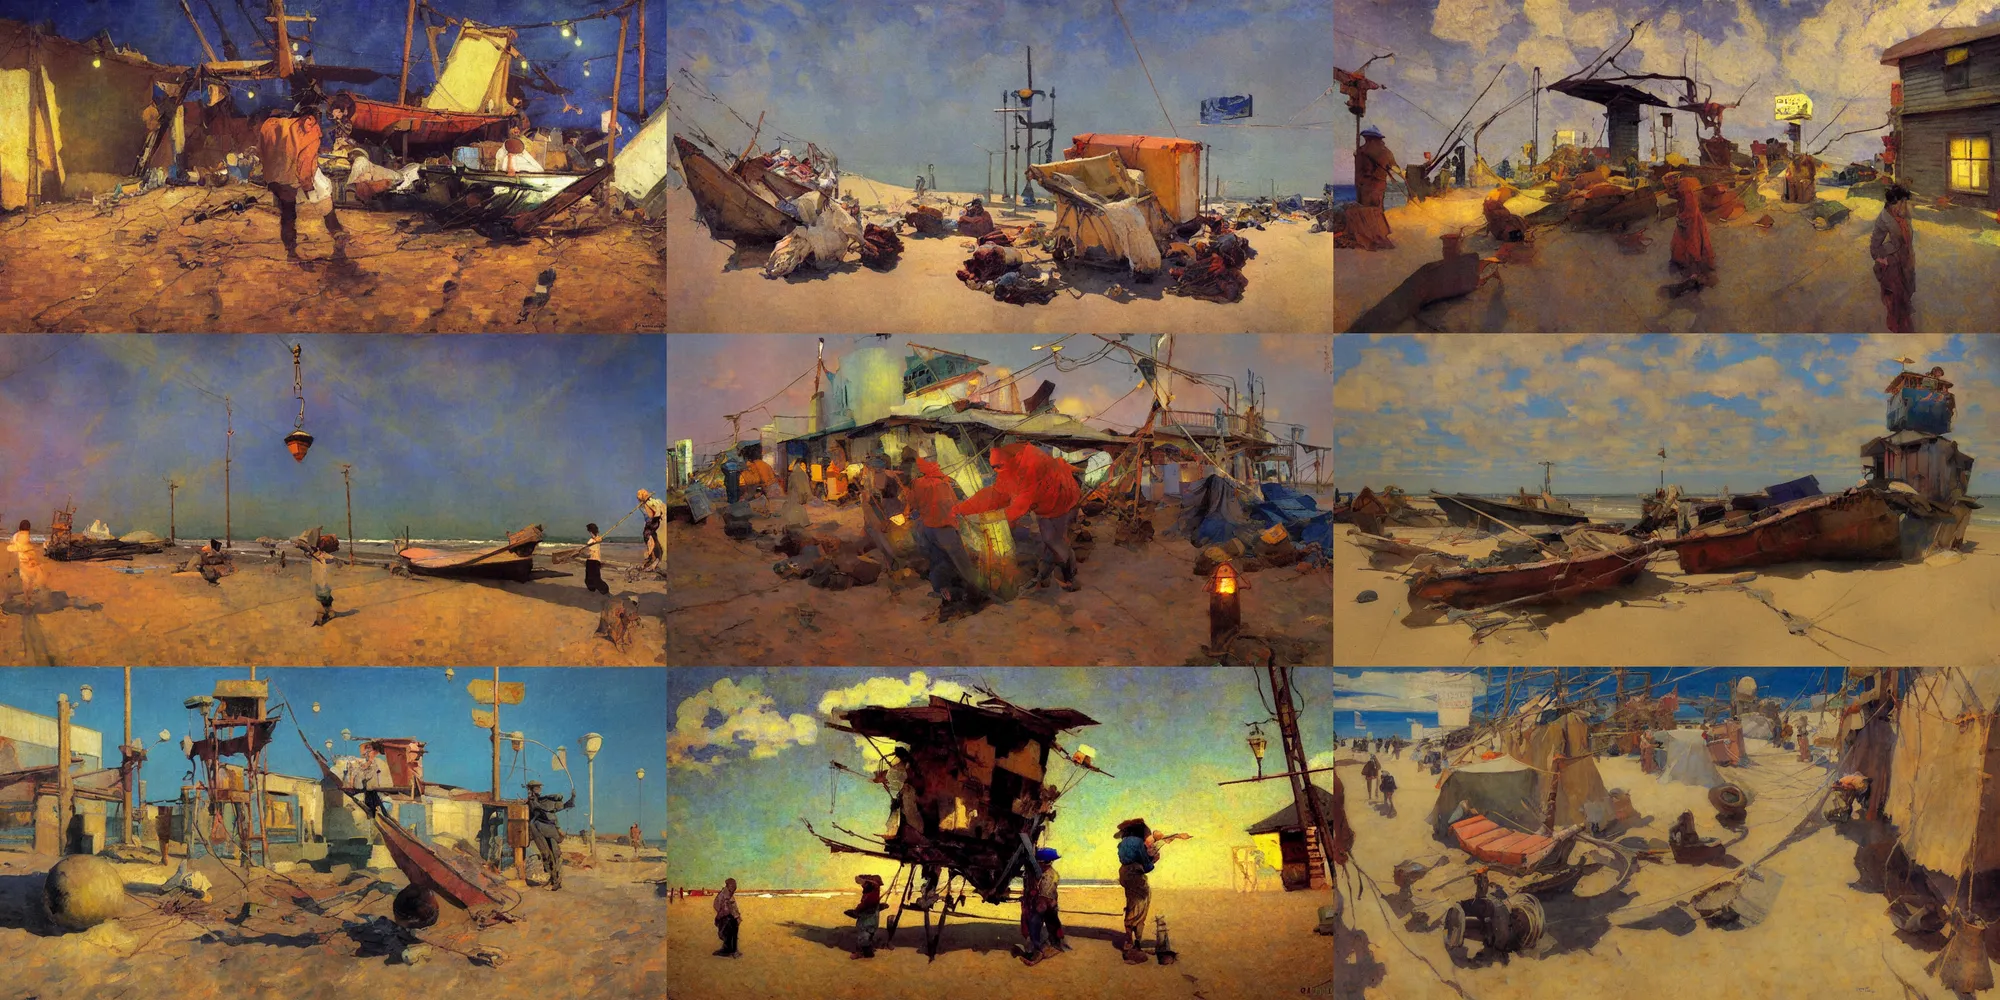 Prompt: painting by dean cornwell, ilya repin, nc wyeth painting, ultra wide, vanishing point, 3 d perspective, beached, end of evangelion, award winning, up close, climbing, beaching, rust, midnight, junk town, lanterns, makeshift house, colorful lightbulb festoon lights, telephone pole